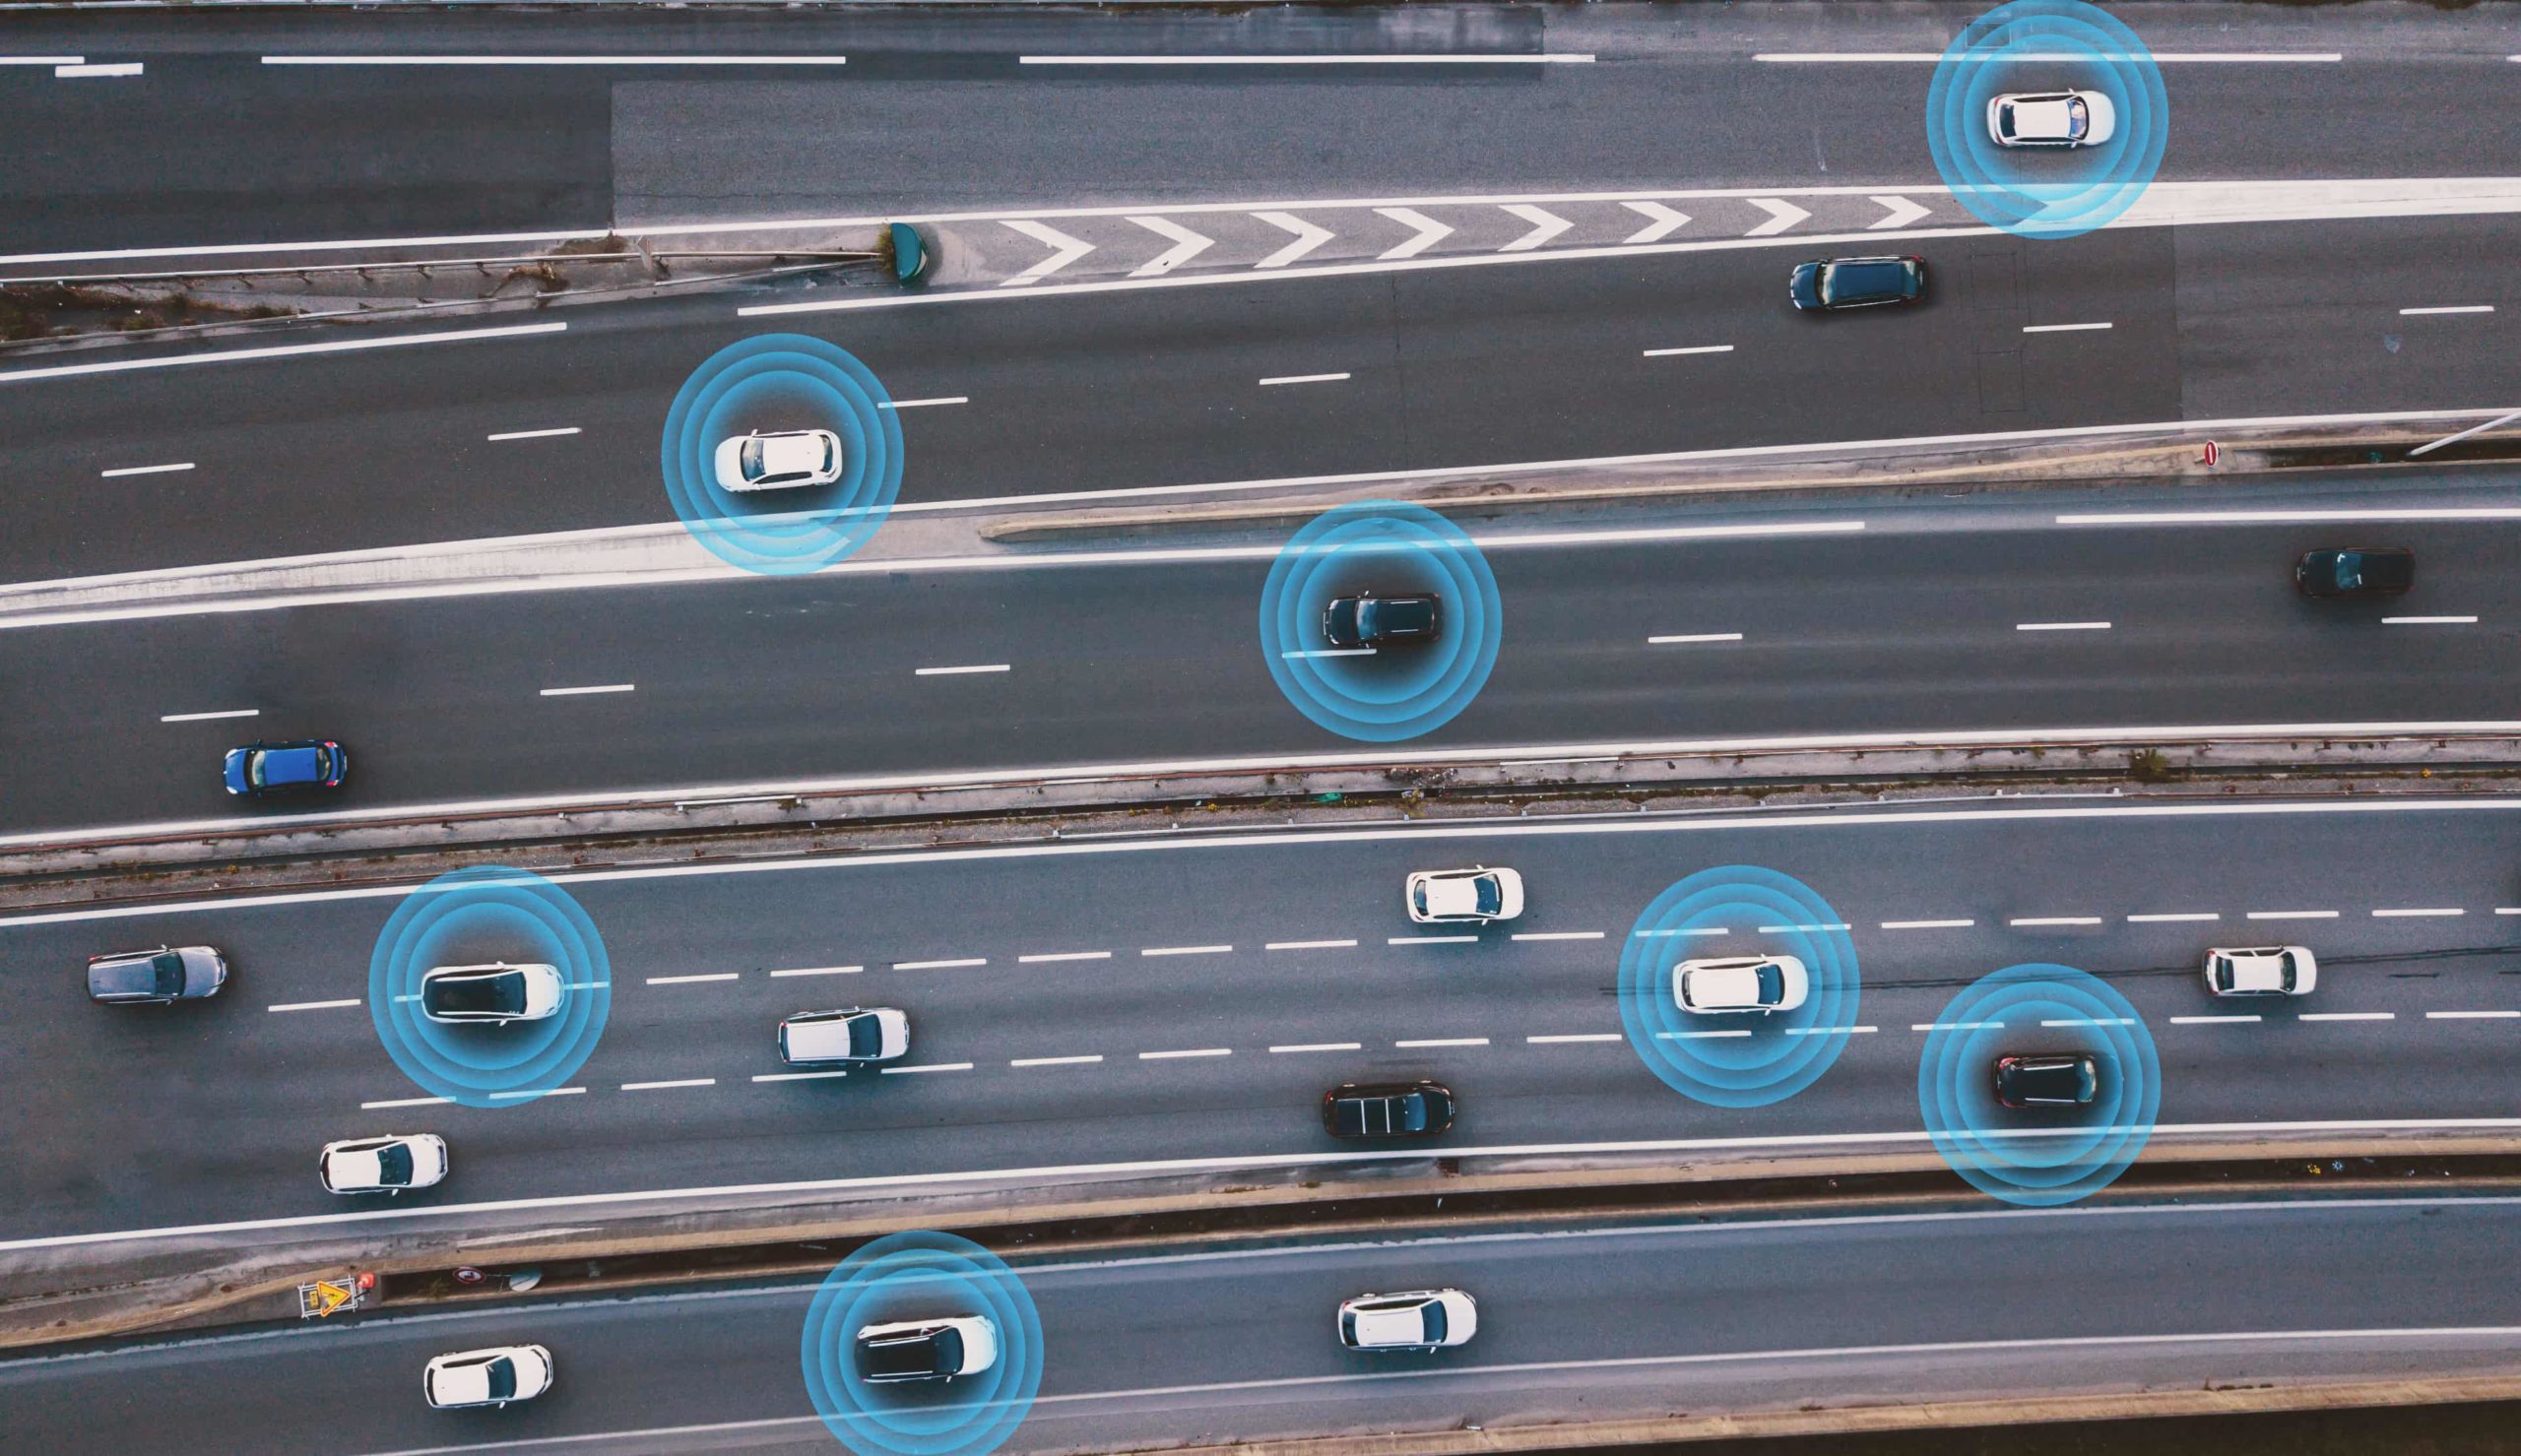 Connected vehicles: Cars driving on the highway communicating with one another